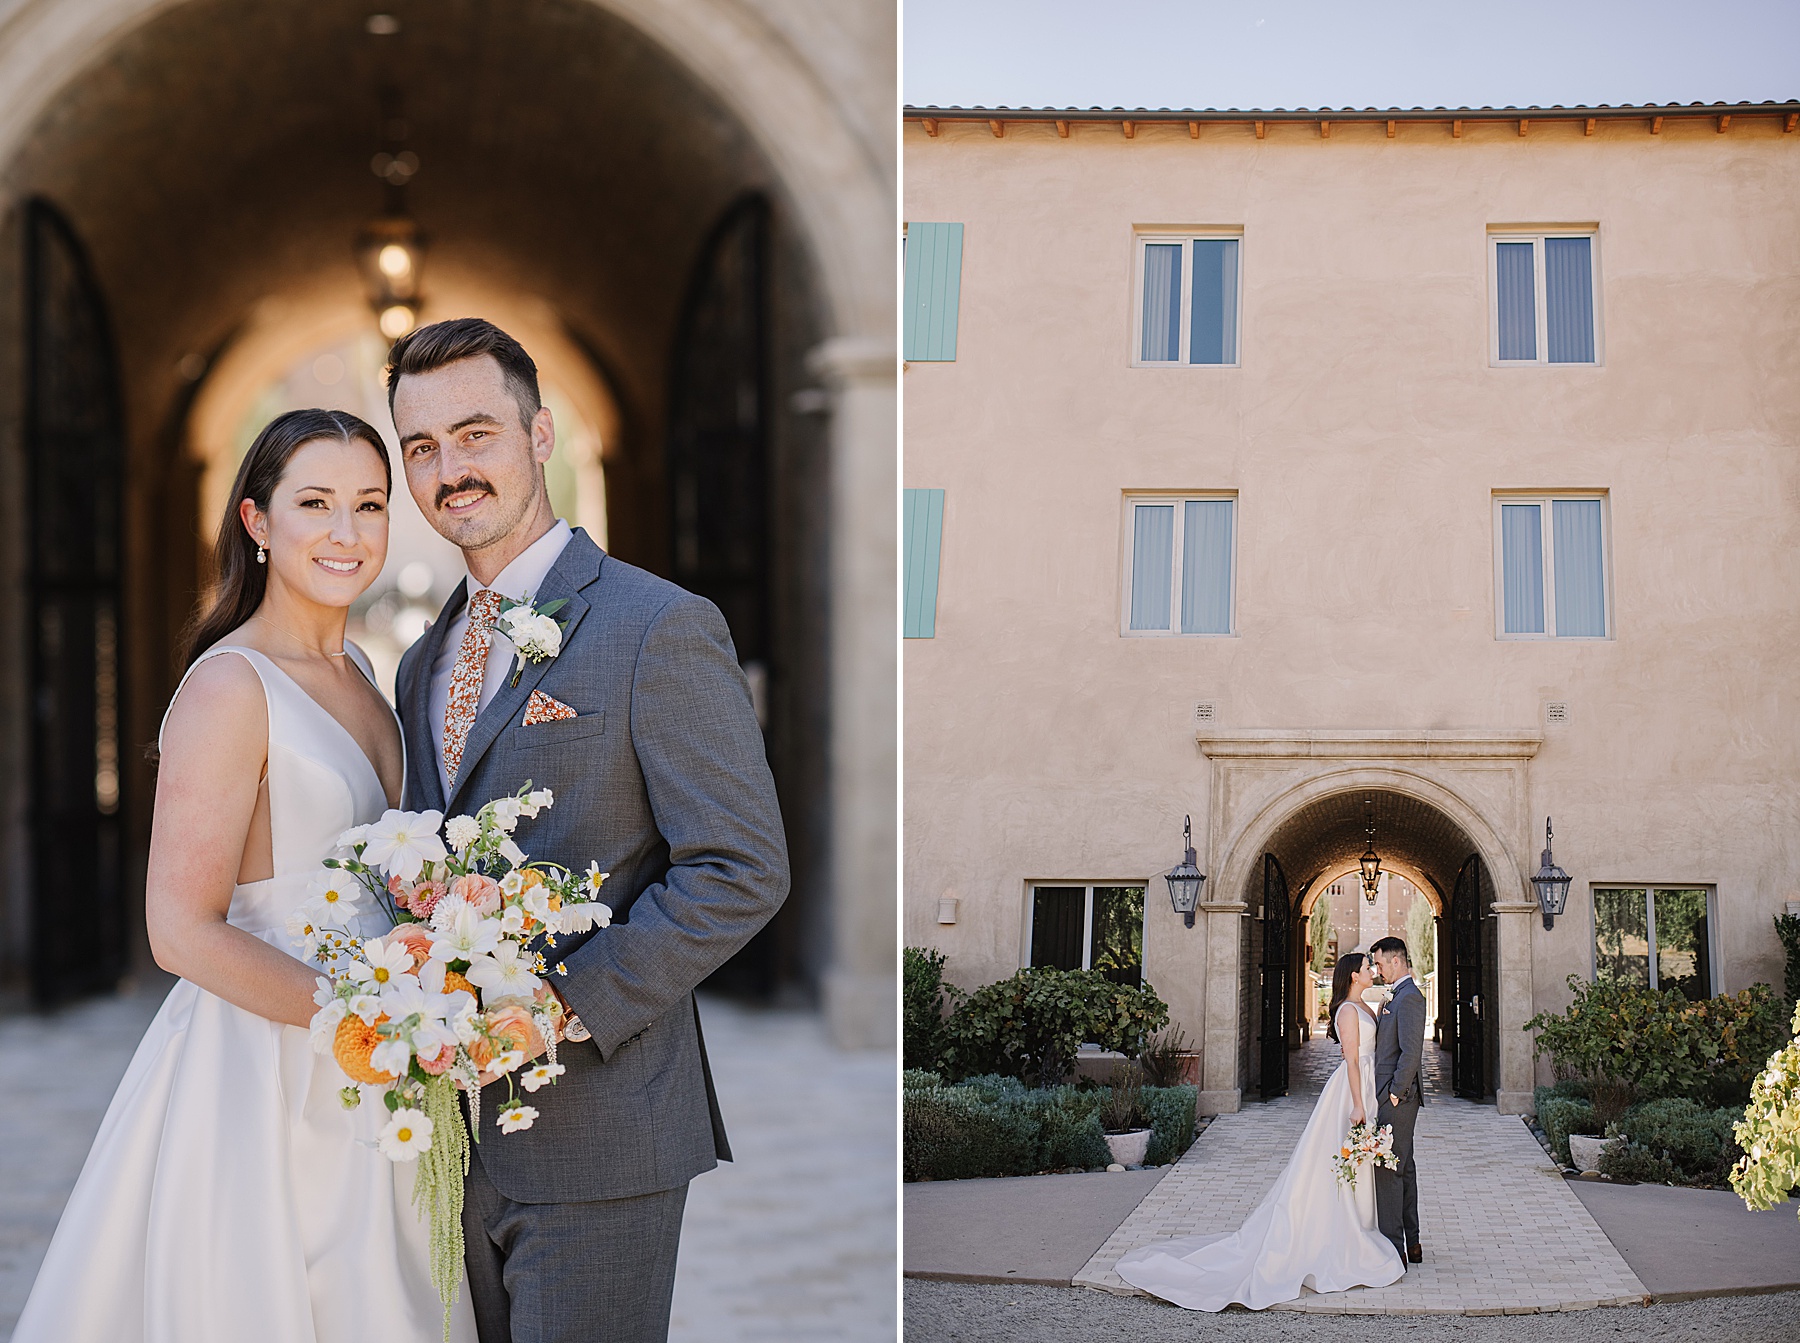 Nikkels Photography, a Paso Robles Destination Photographer, shares inspiration for an autumn Private Estate Wedding in Paso Robles, CA